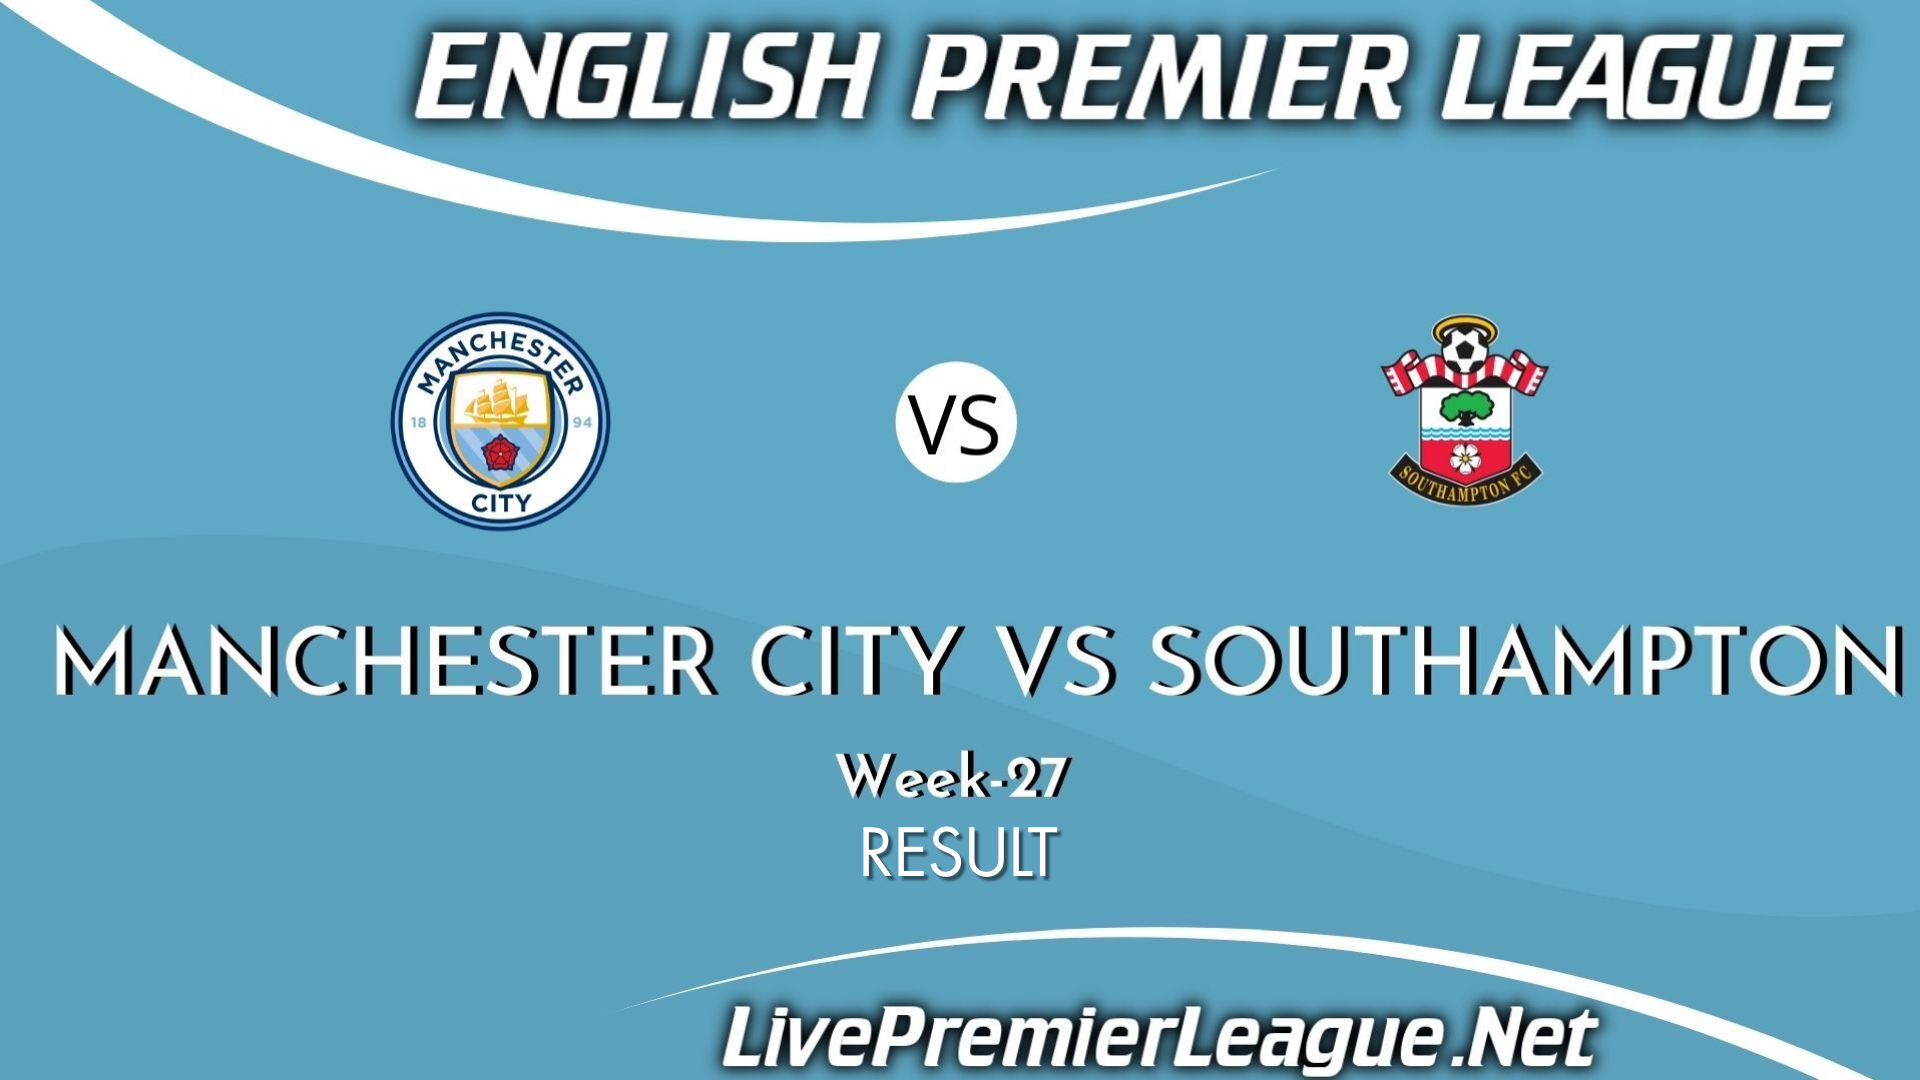 Manchester City Vs Southampton | Week 27 Result 2021 EPL